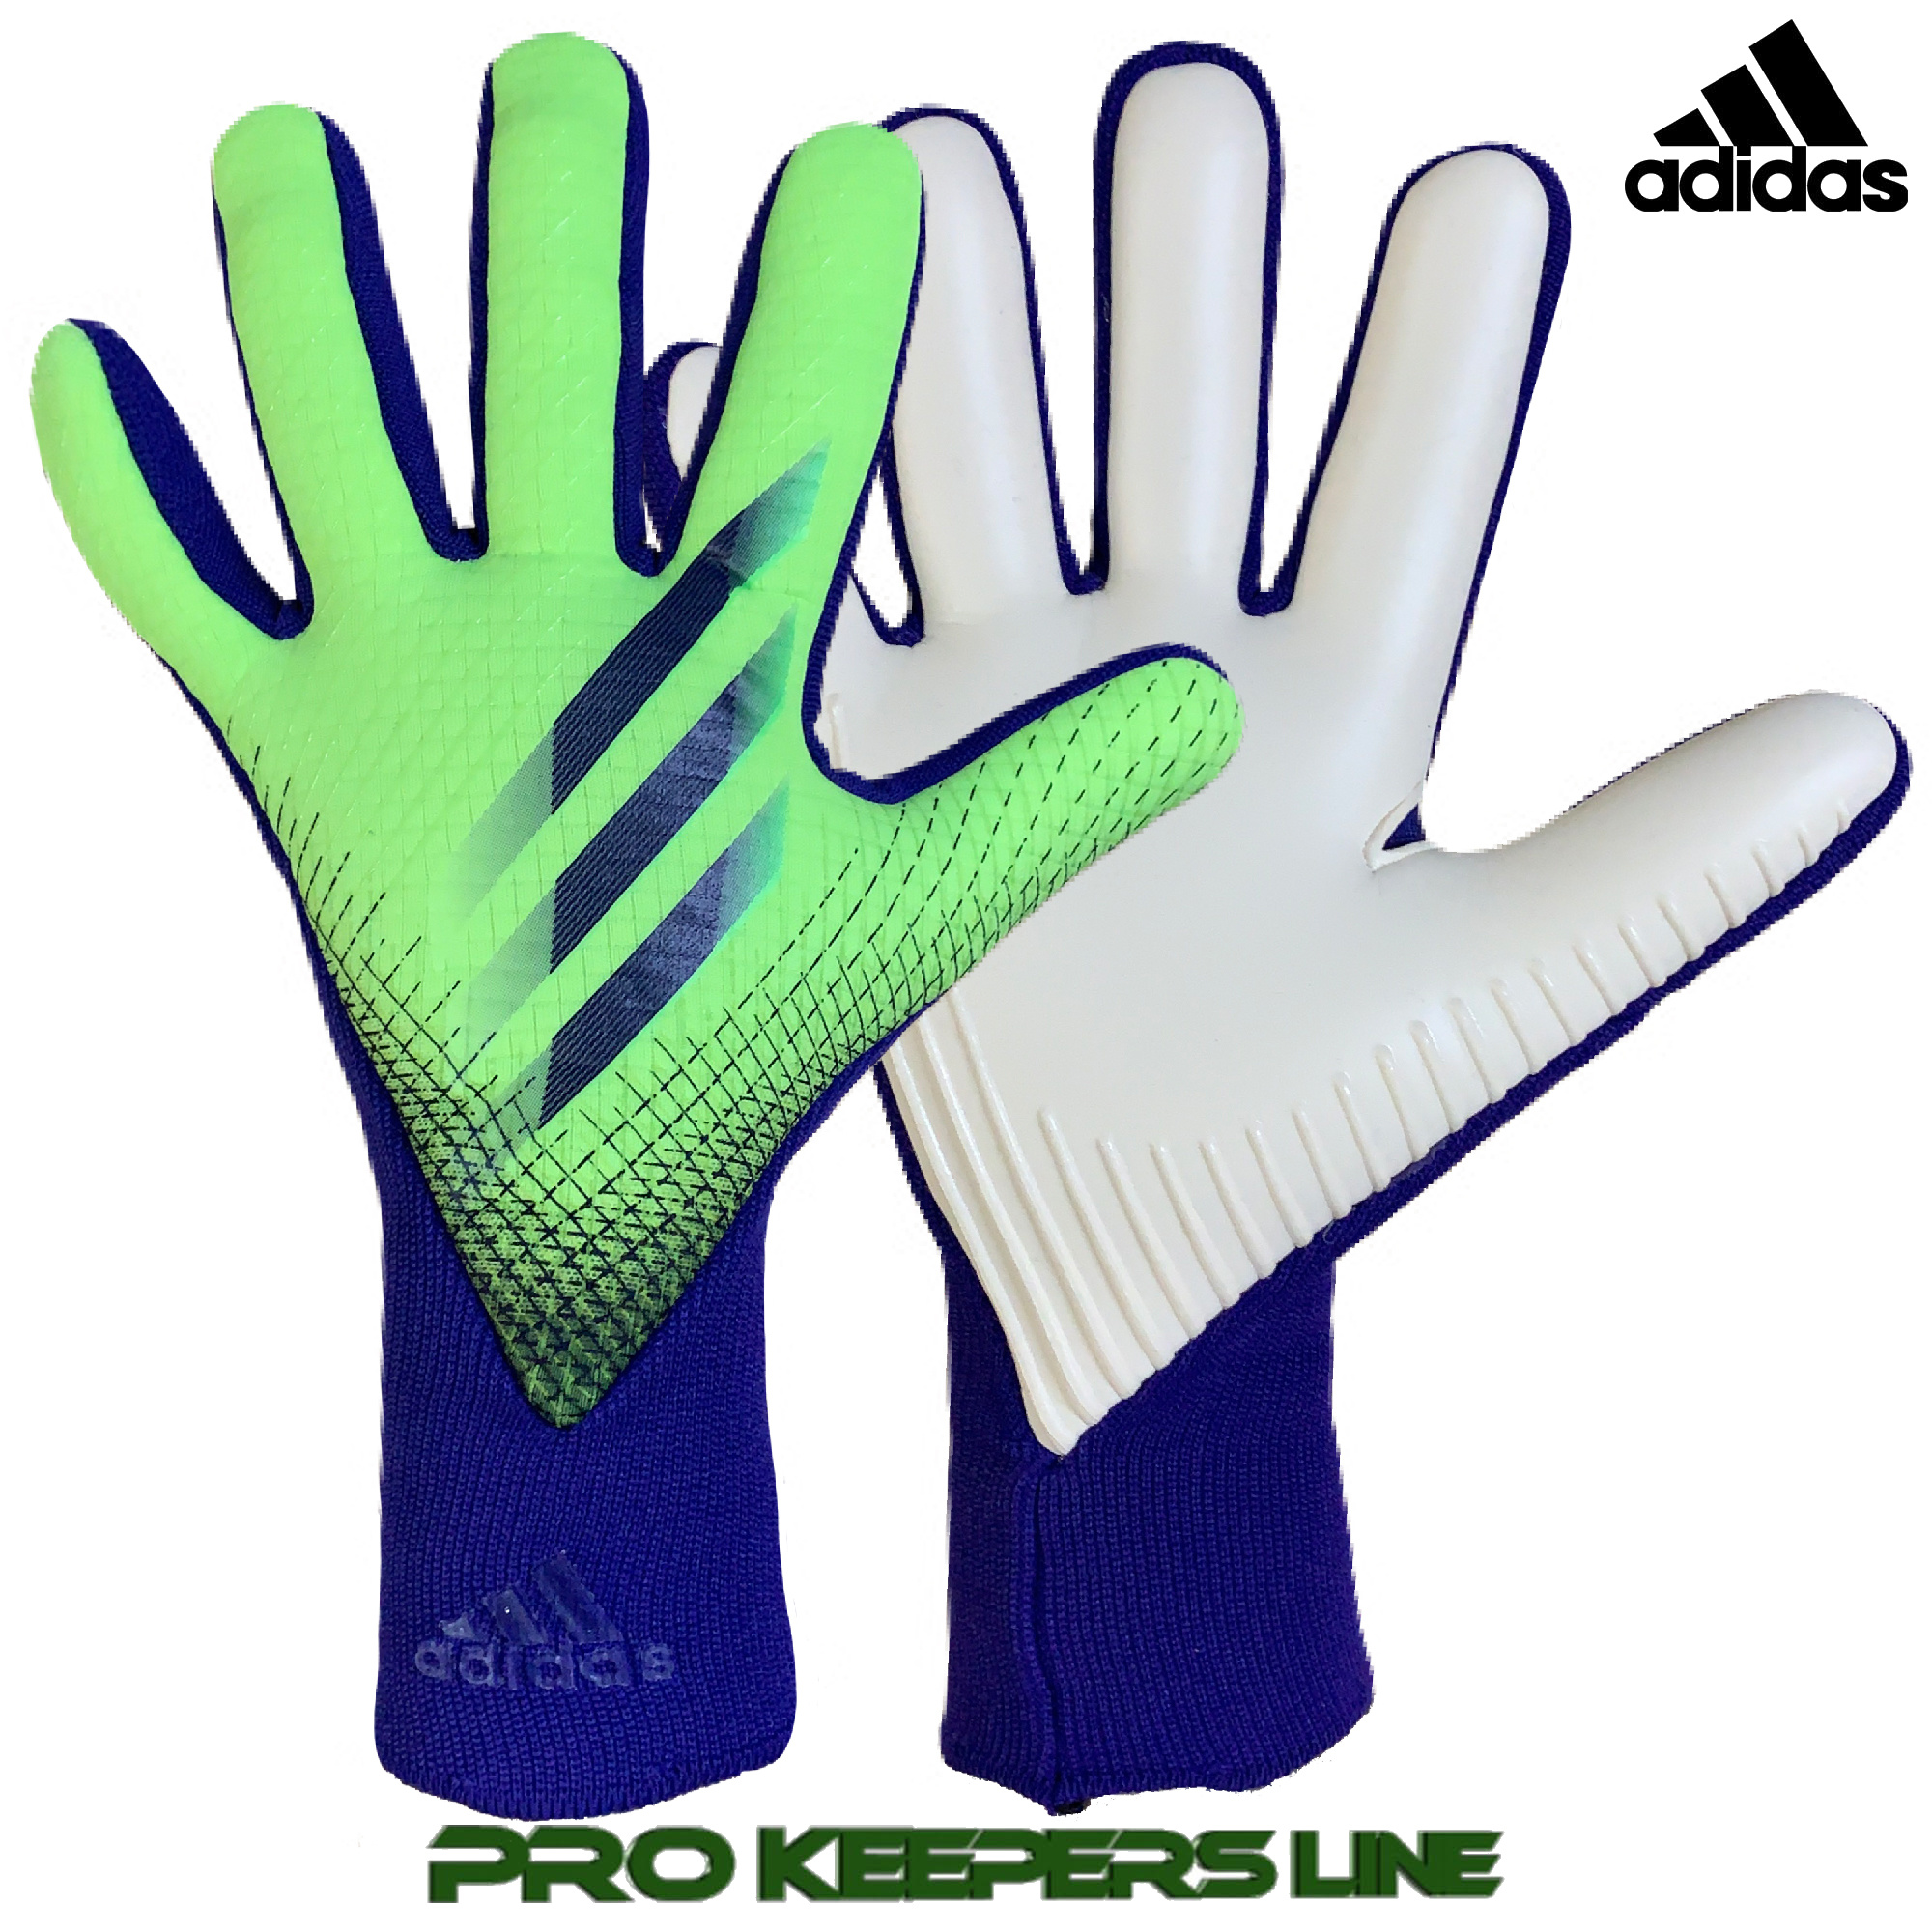 Adidas X Gl Pro Signal Green Energy Ink Solar Green Pro Keepers Line